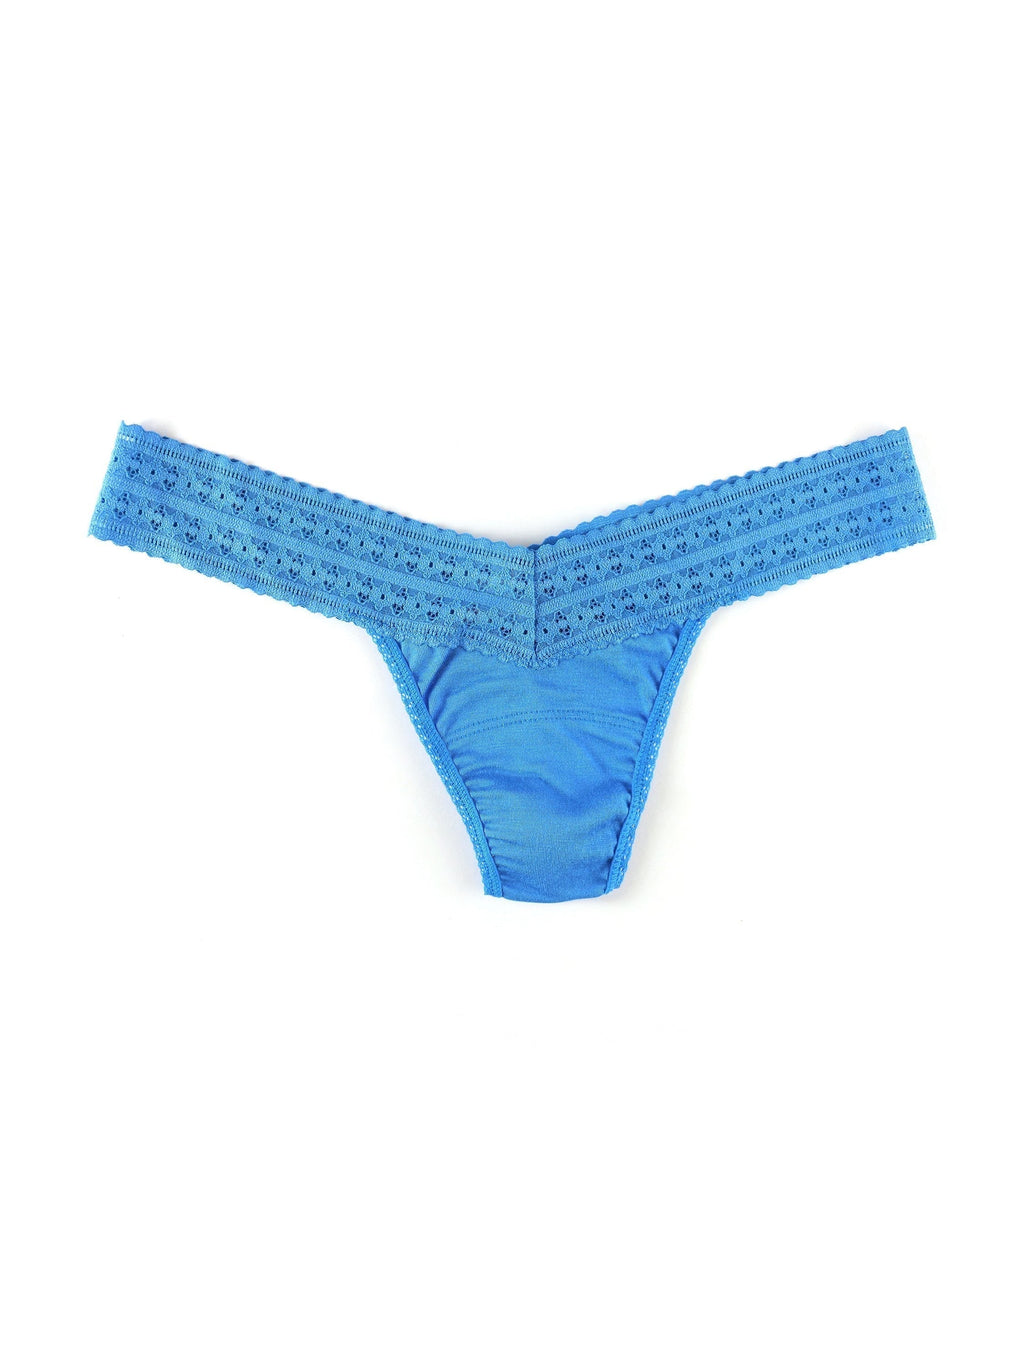 Hanky Panky Women's Daily Lace Original Rise Thong - One Size - Storm Cloud  Blue : Target